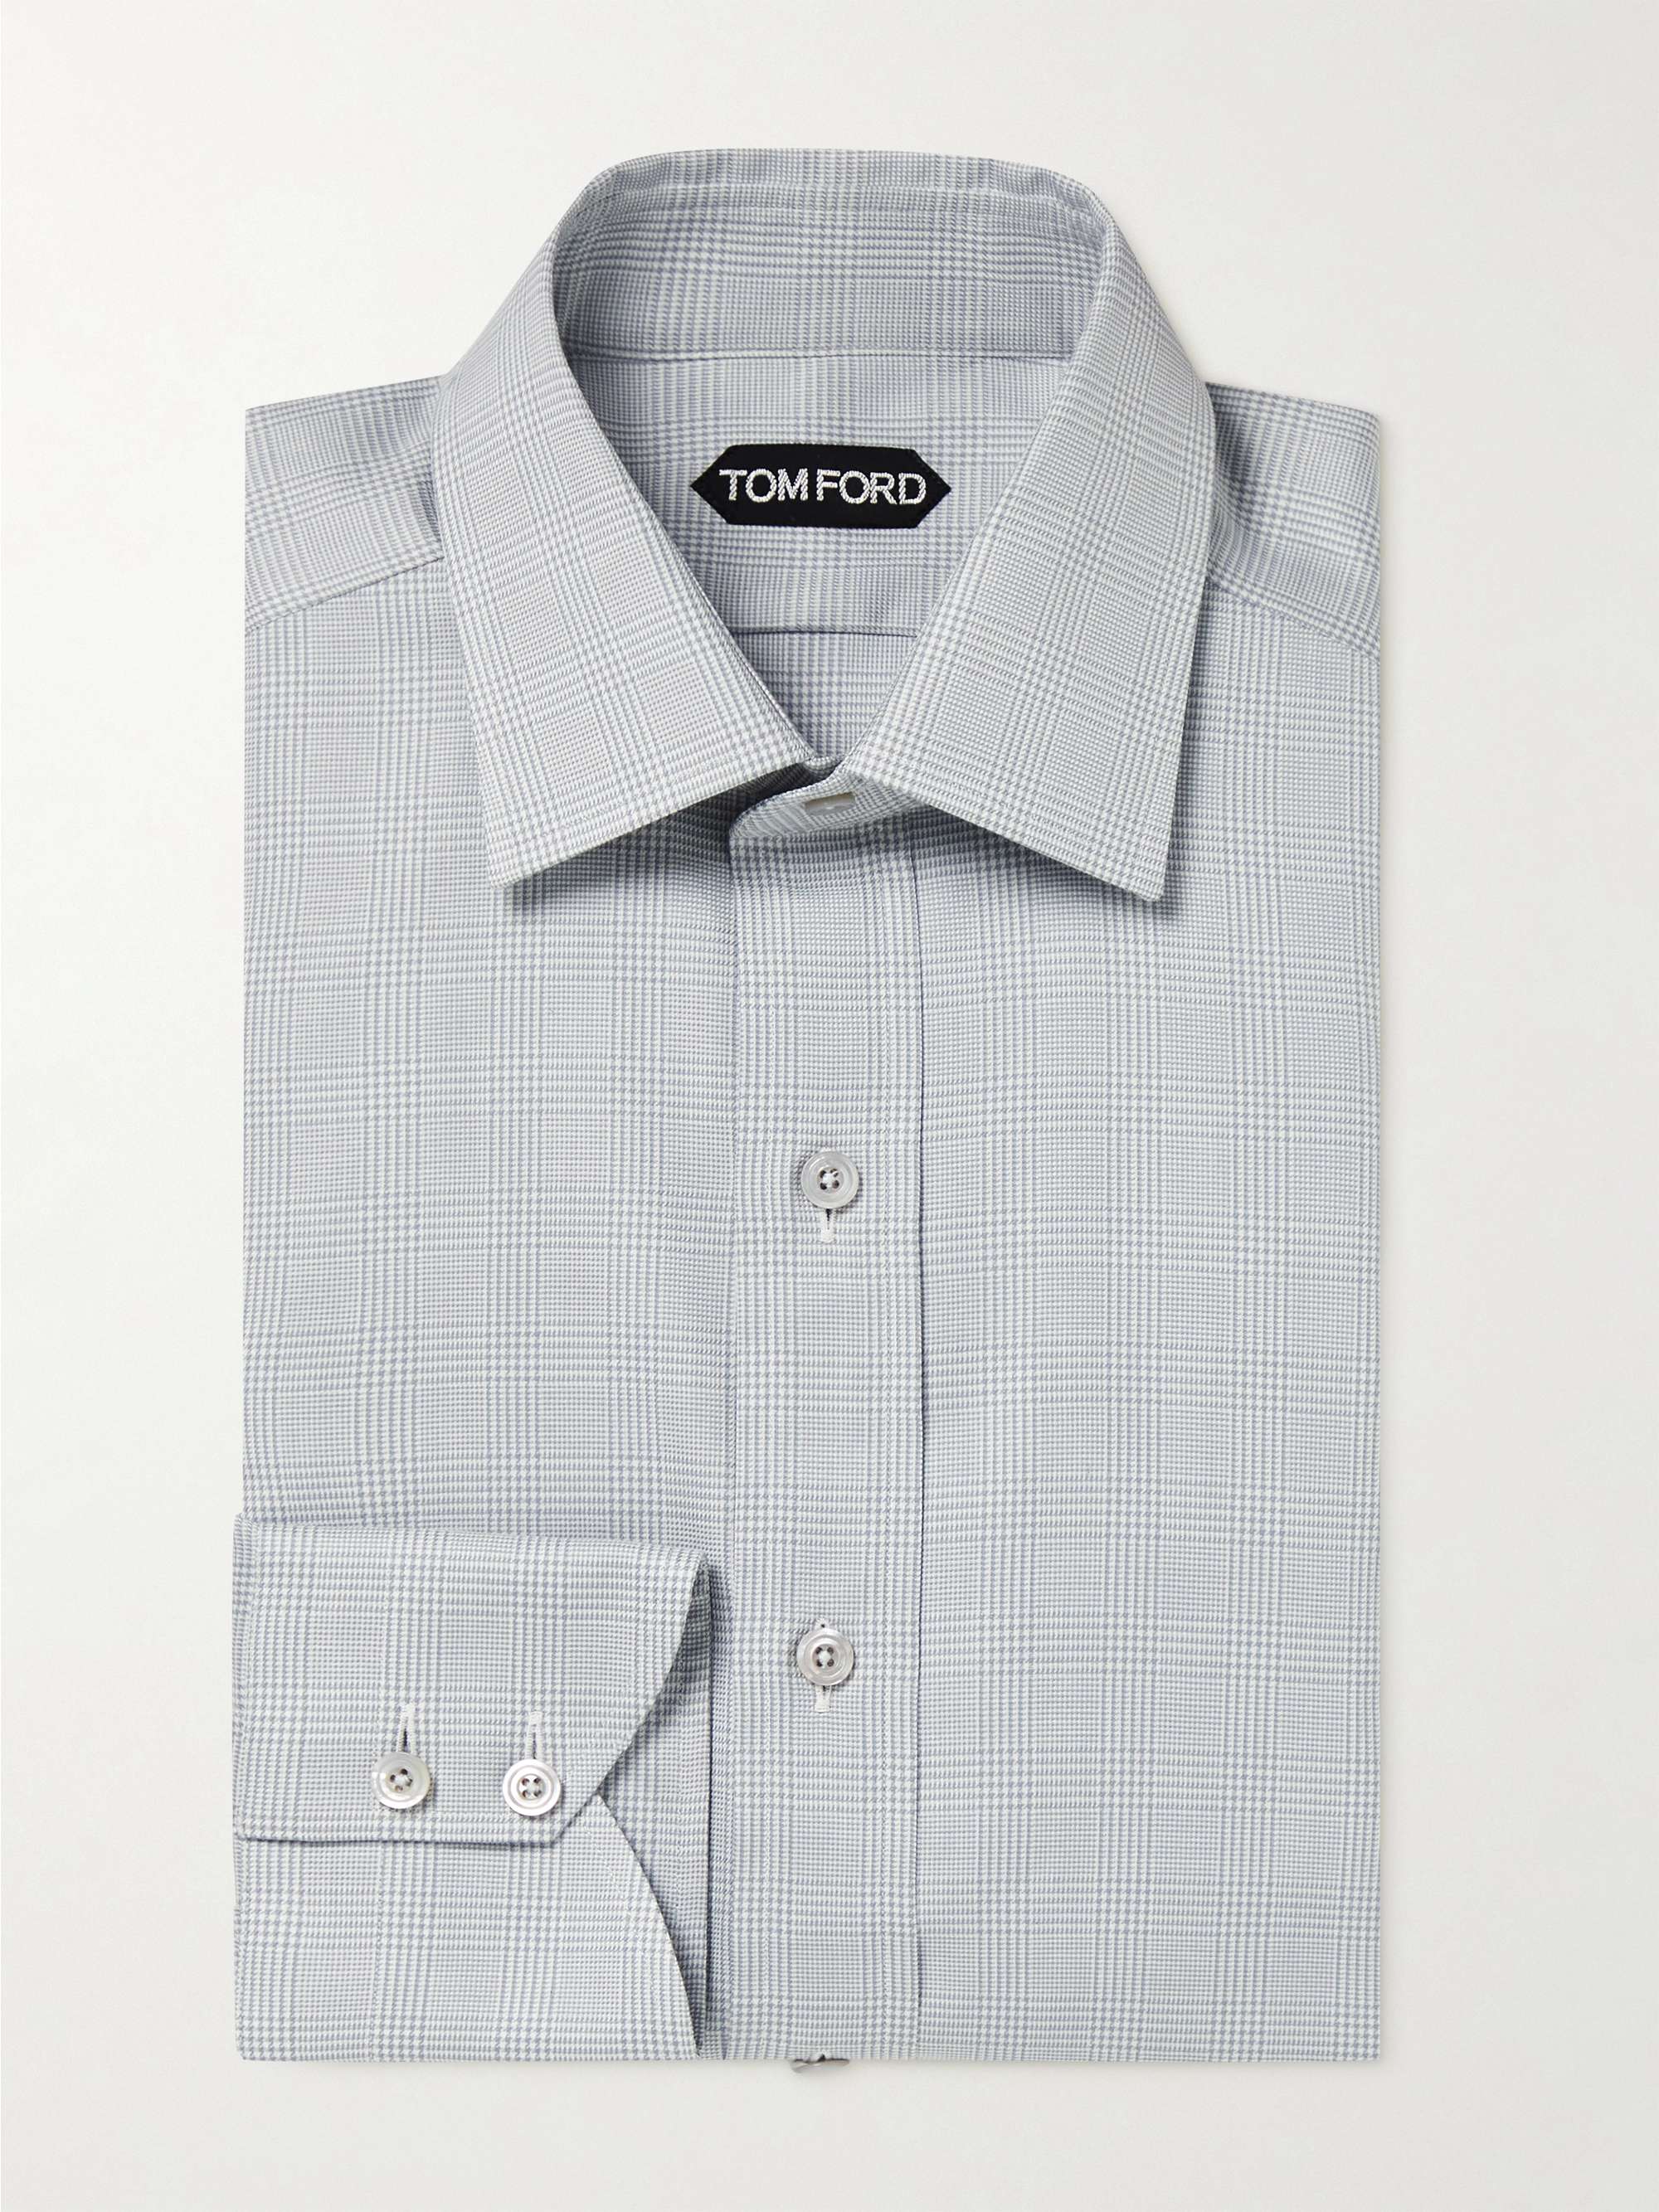 TOM FORD Slim-Fit Prince of Wales Checked Cotton Shirt